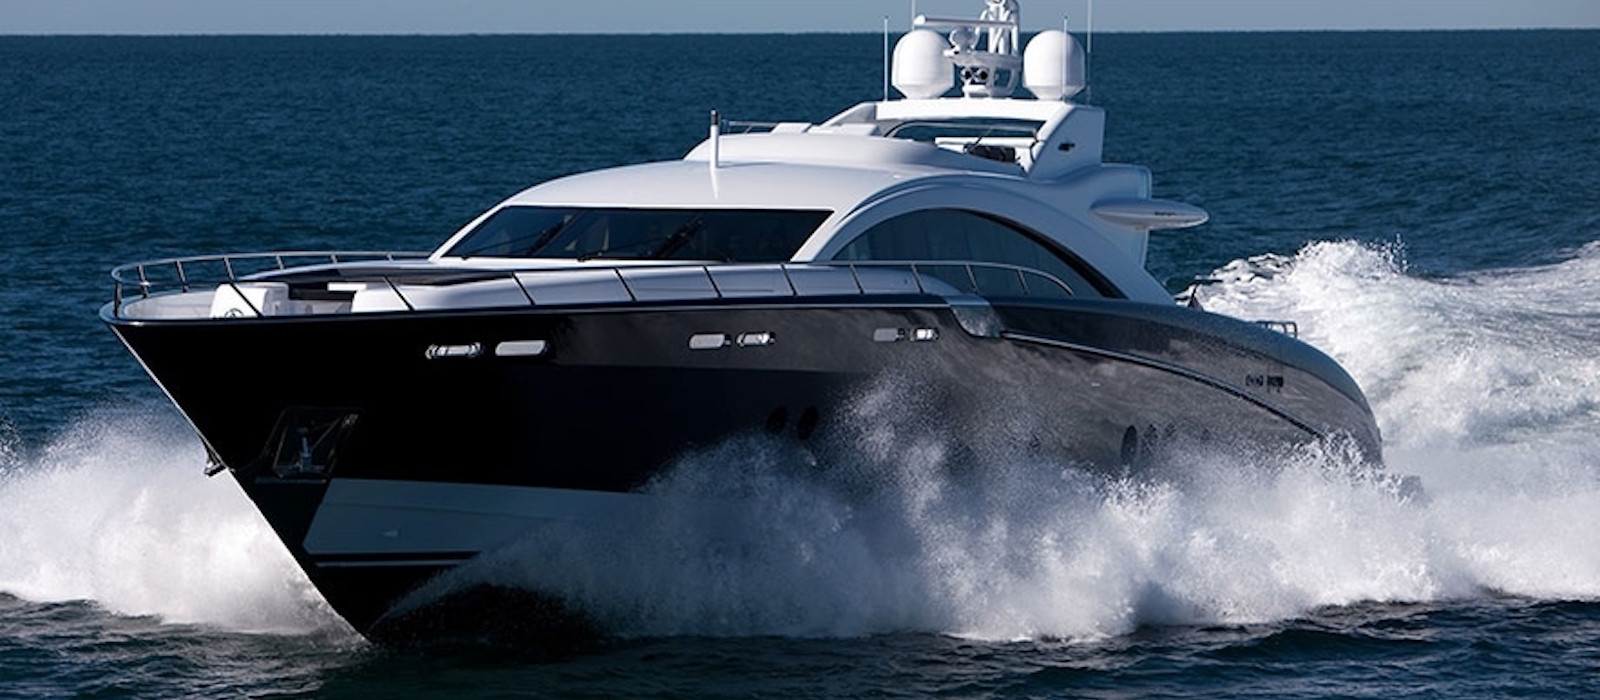 Bow view of Quantum super yacht hire